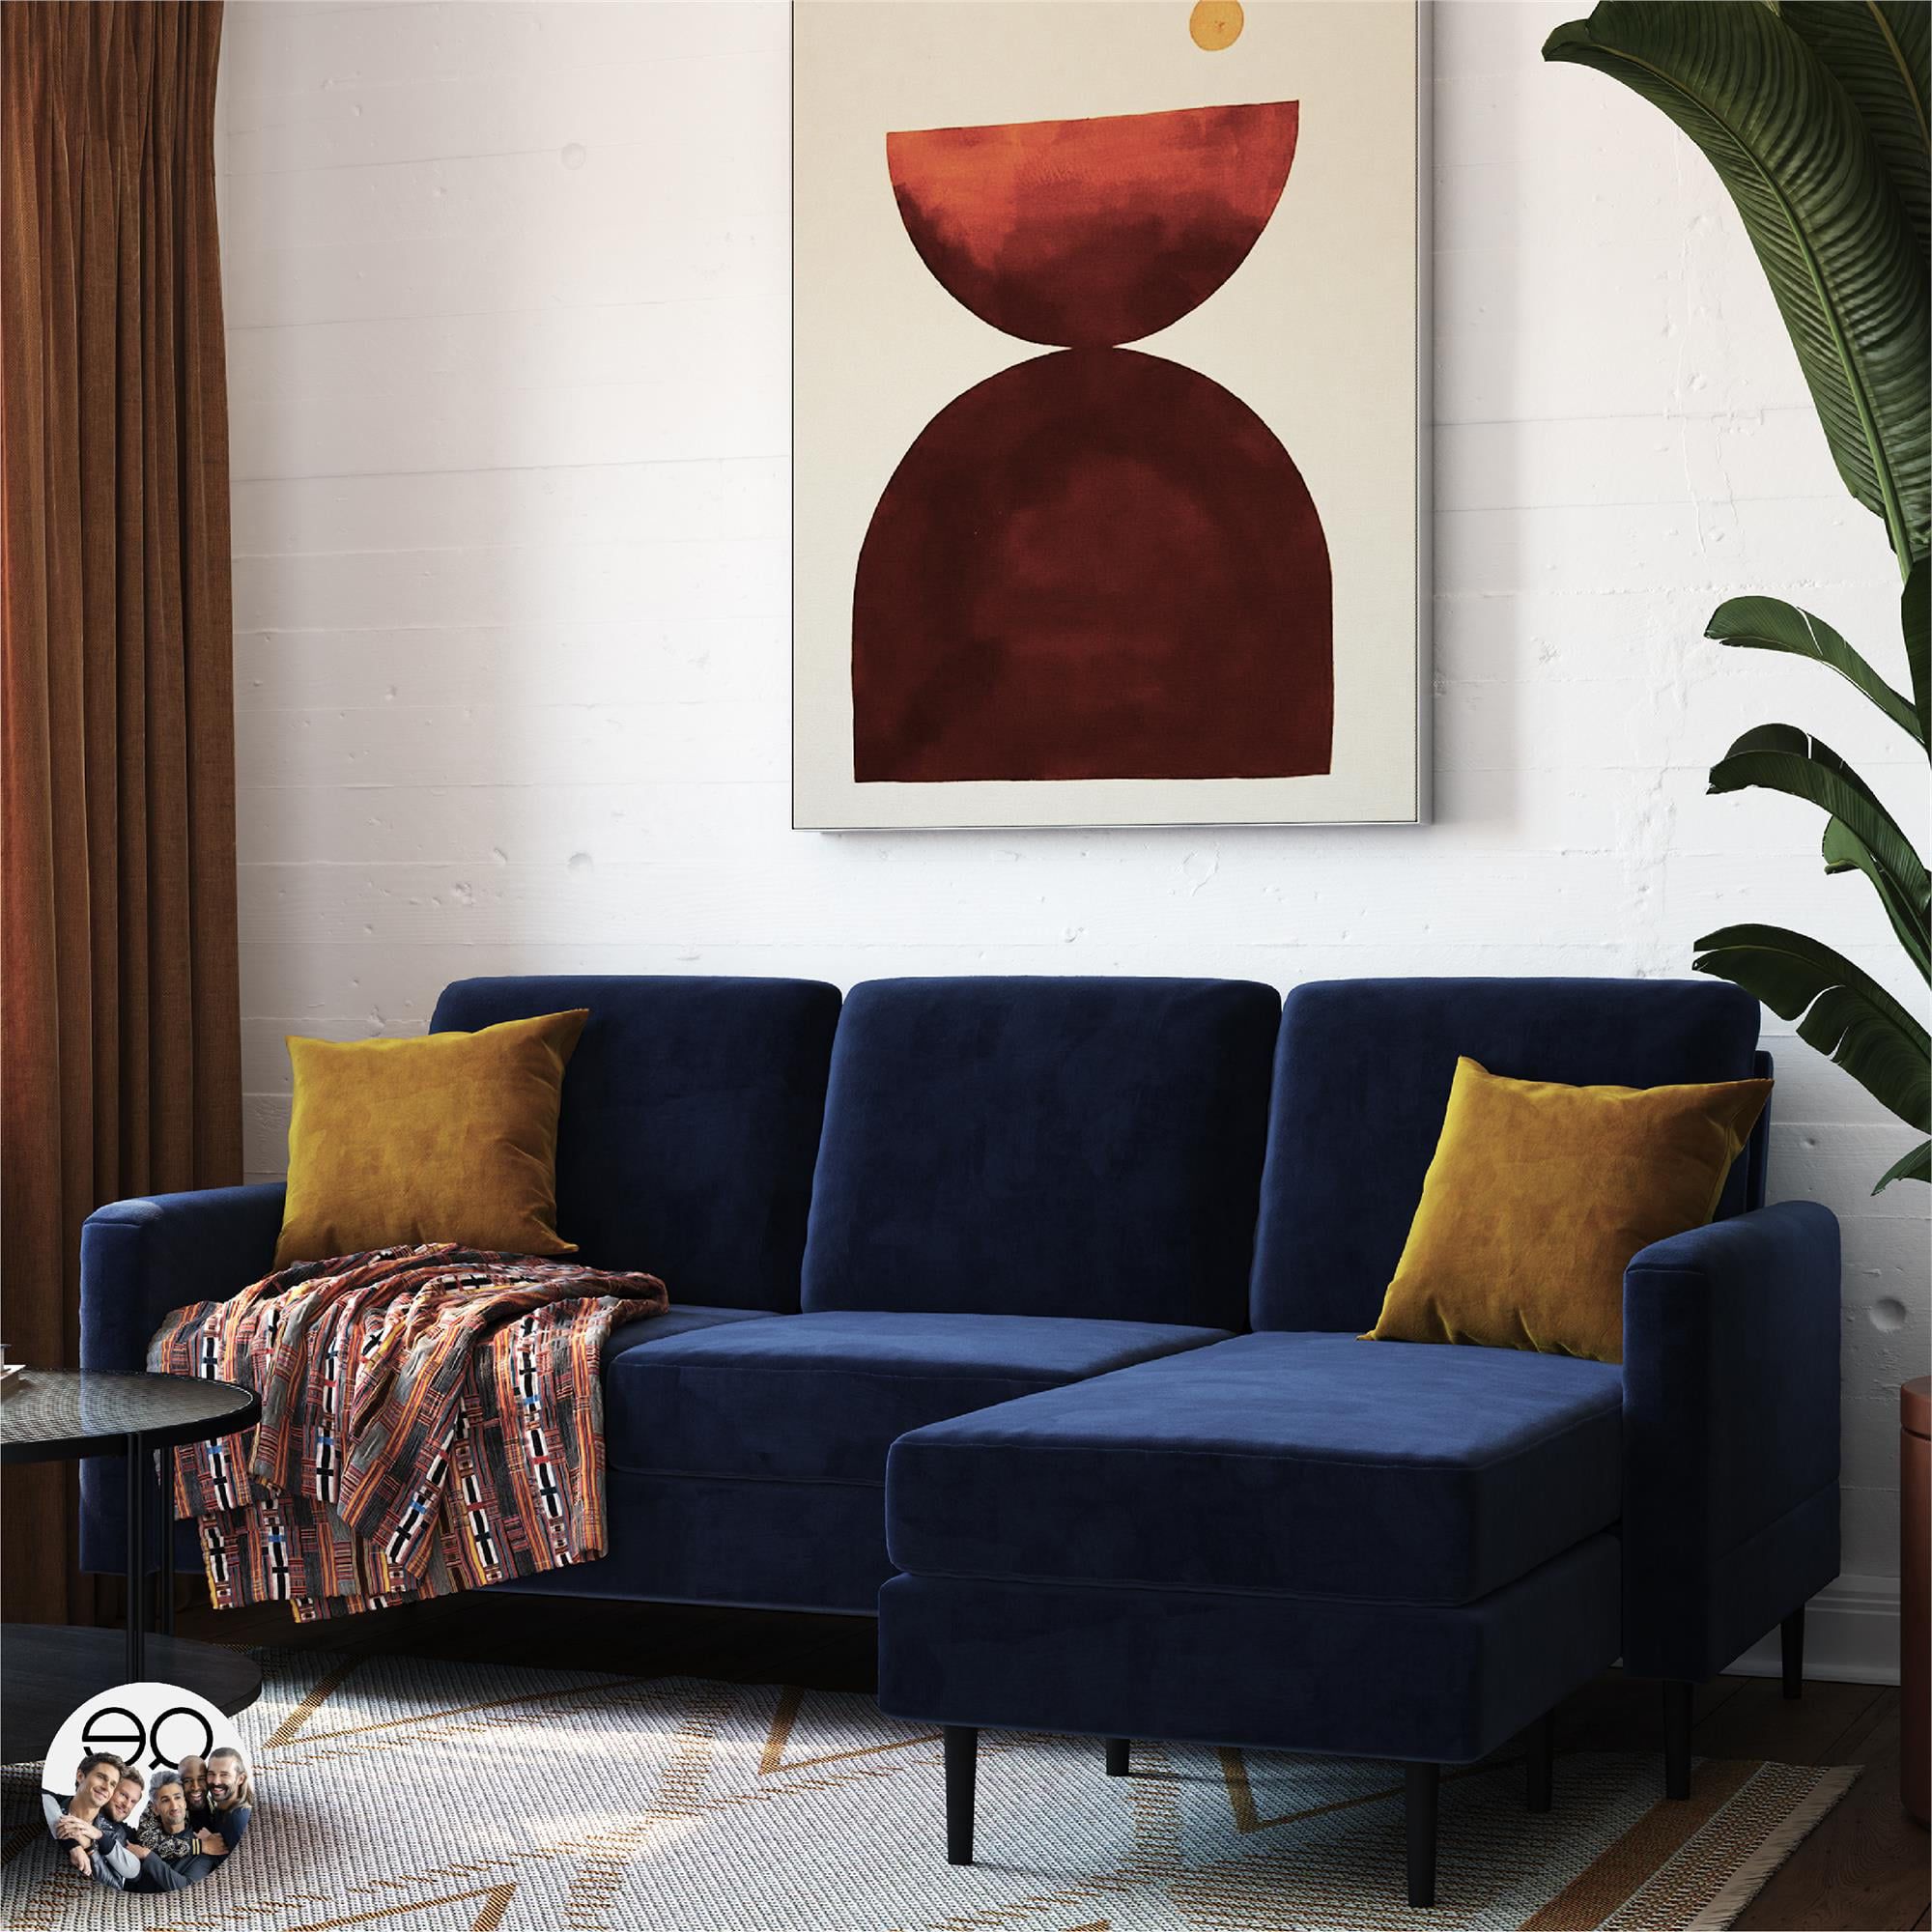 Queer Eye Wimberly Pillowback Sofa Sectional, Blue Velvet – Walmart For Pillowback Sofa Sectionals (View 3 of 20)